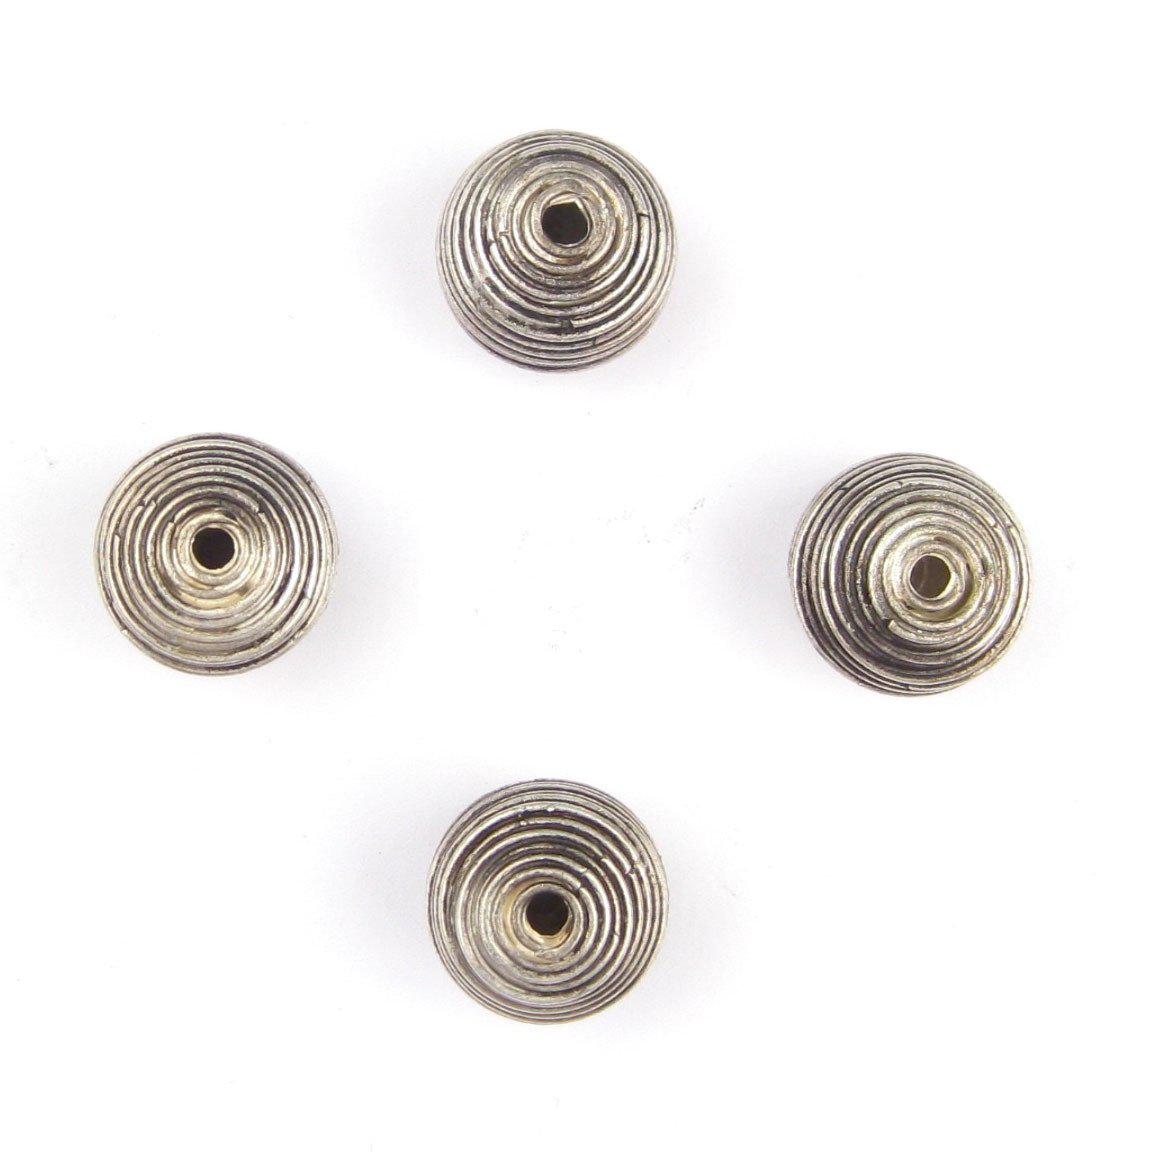 TheBeadChest Artisanal Berber Silver Spiral Beads 15x17mm Set of 4 Morocco African Round White Metal Large Hole Handmade